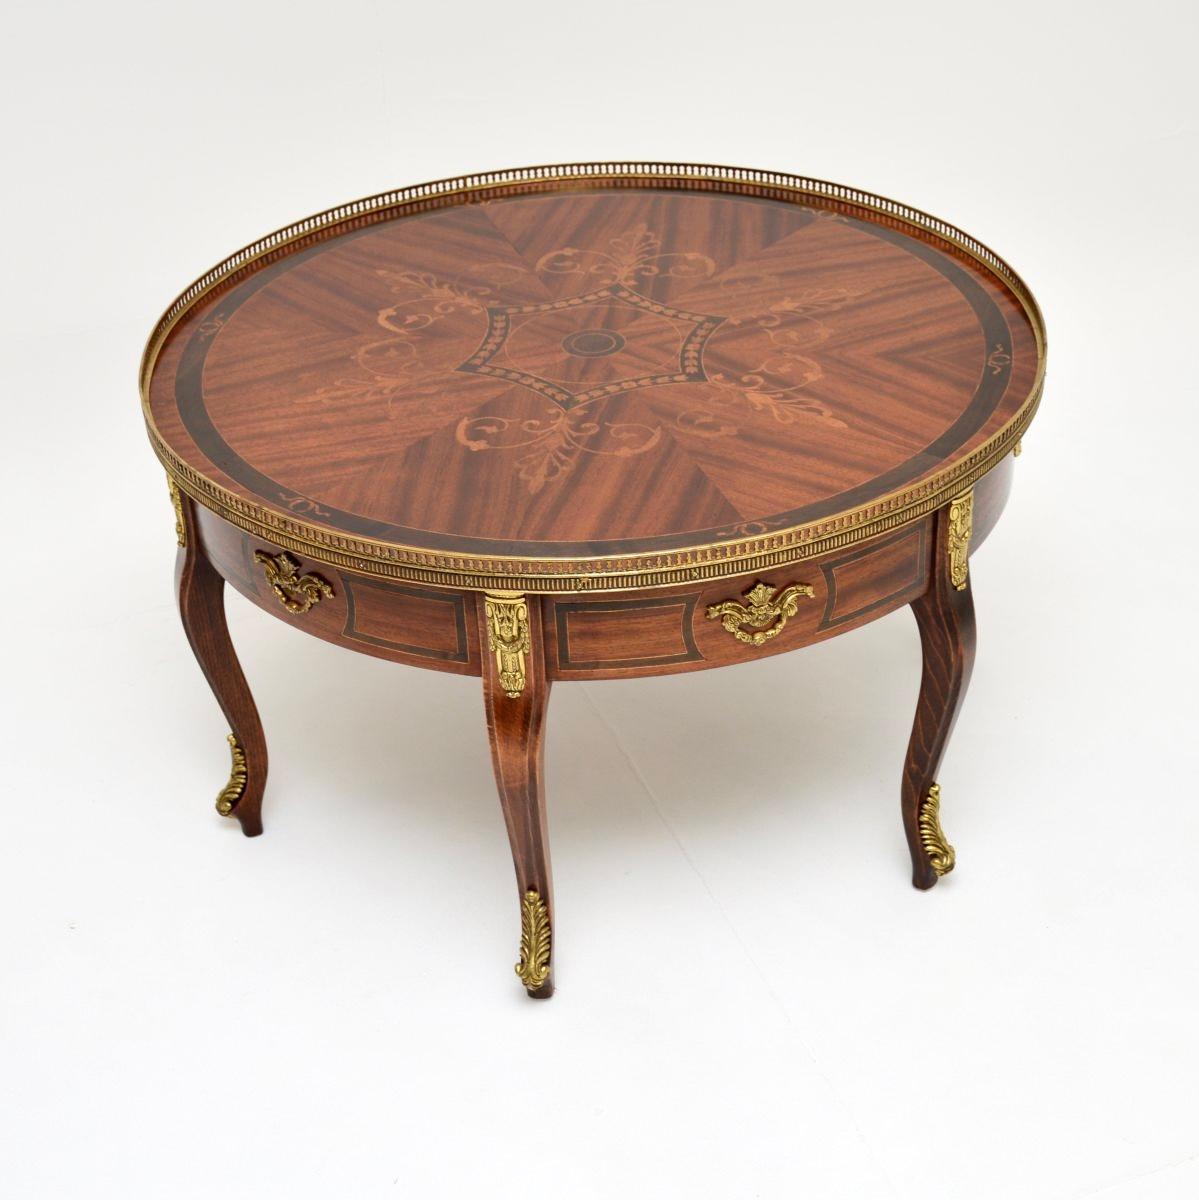 A large and impressive antique French coffee table, dating from around the 1930’s.

This is of exceptional quality, with absolutely gorgeous inlays of various wood, There is a pierced brass gallery and high quality gilt metal mounts, this stands on